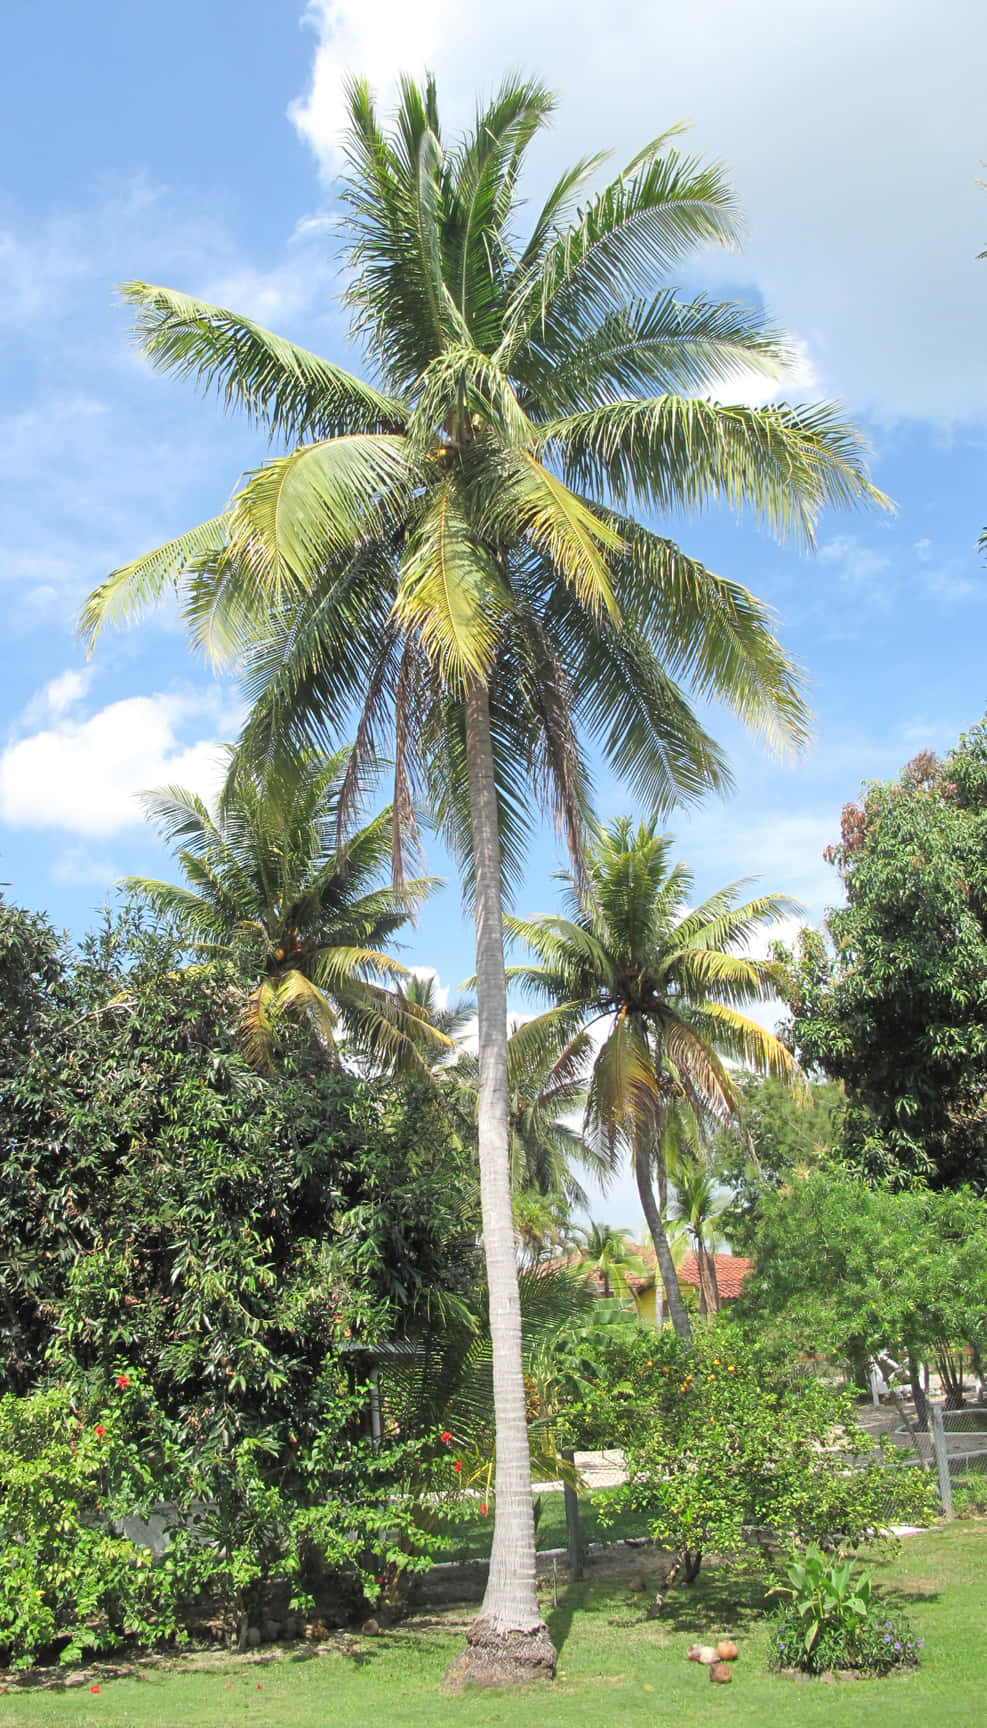 Enjoy the tropical vibes with an incredible view of this Coconut Tree